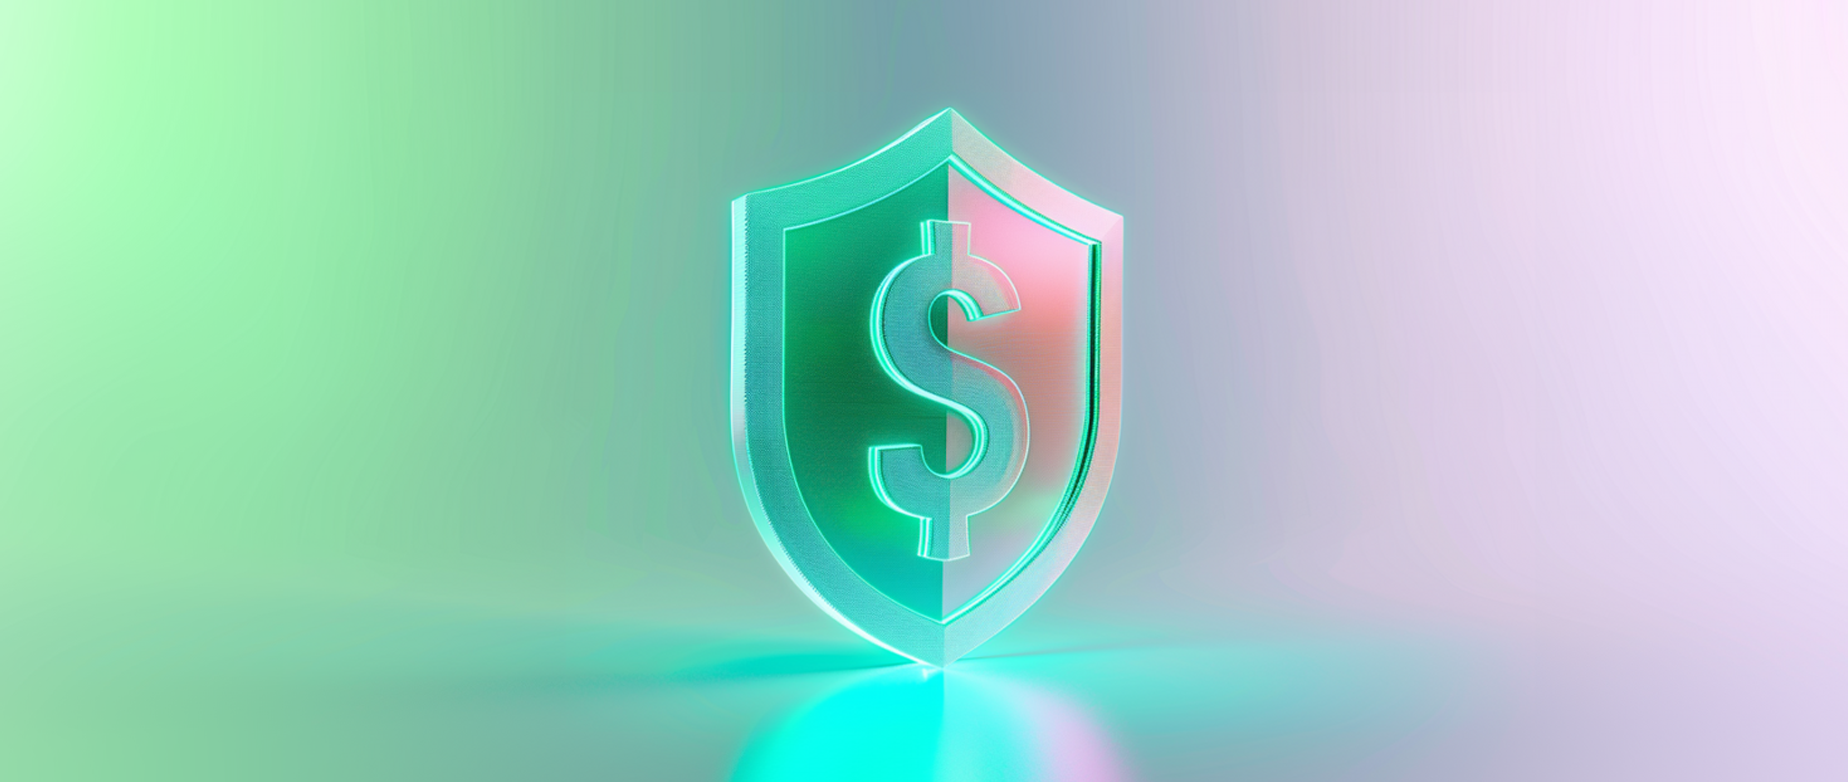 Image of a shield with a dollar sign on it with green and blue color scheme.